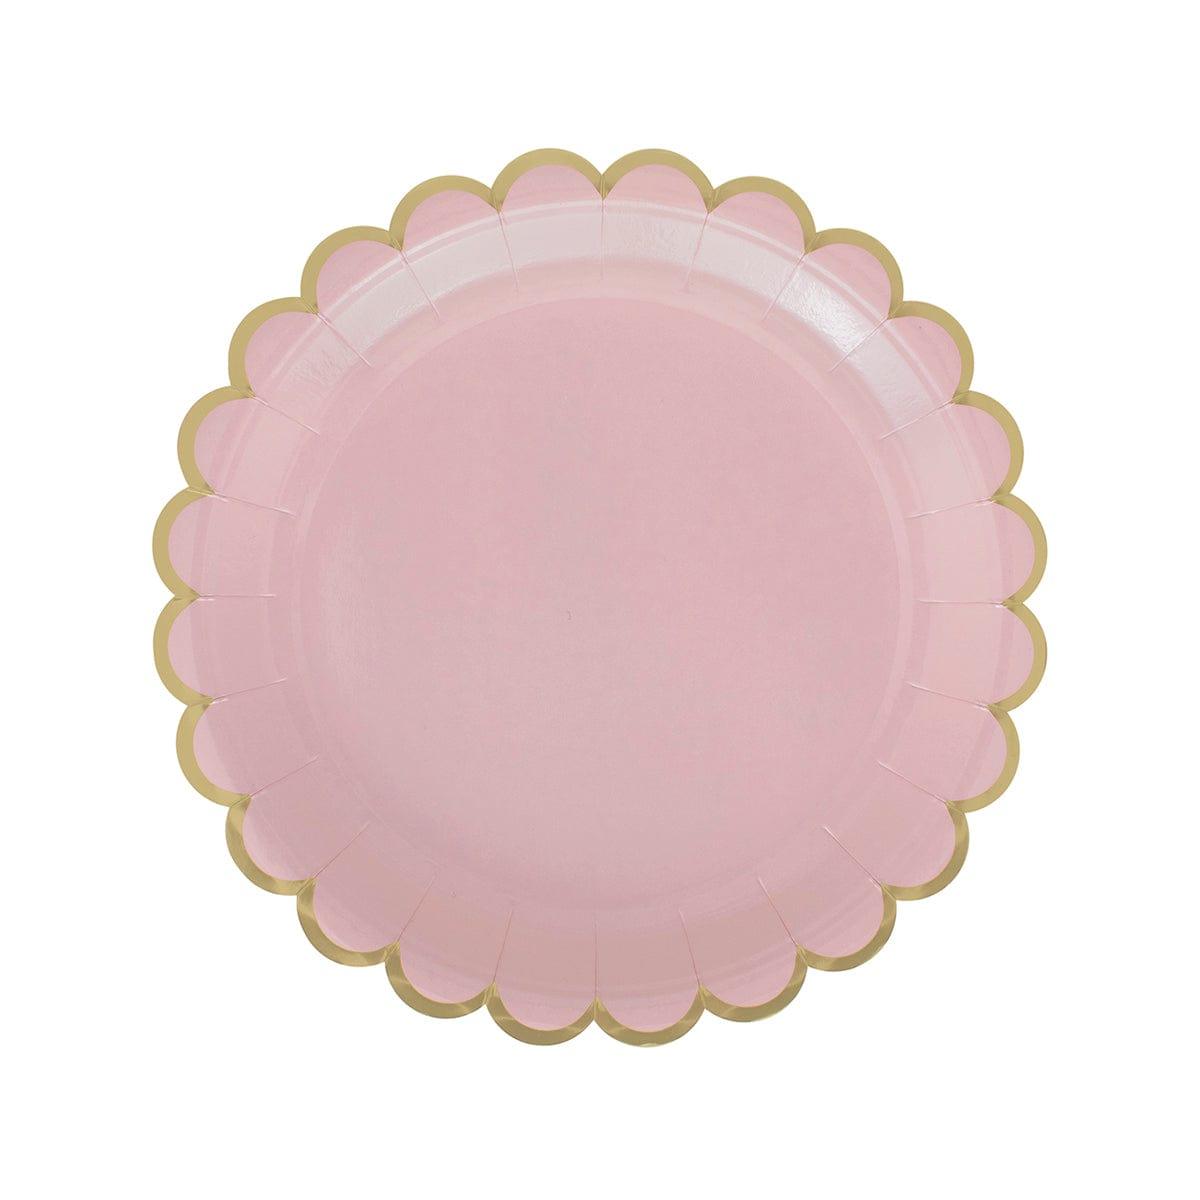 YIWU SANDY PAPER PRODUCTS CO., LTD Everyday Entertaining Pink Flowers Gold Edge Plates, 9 Inches, 8 Count